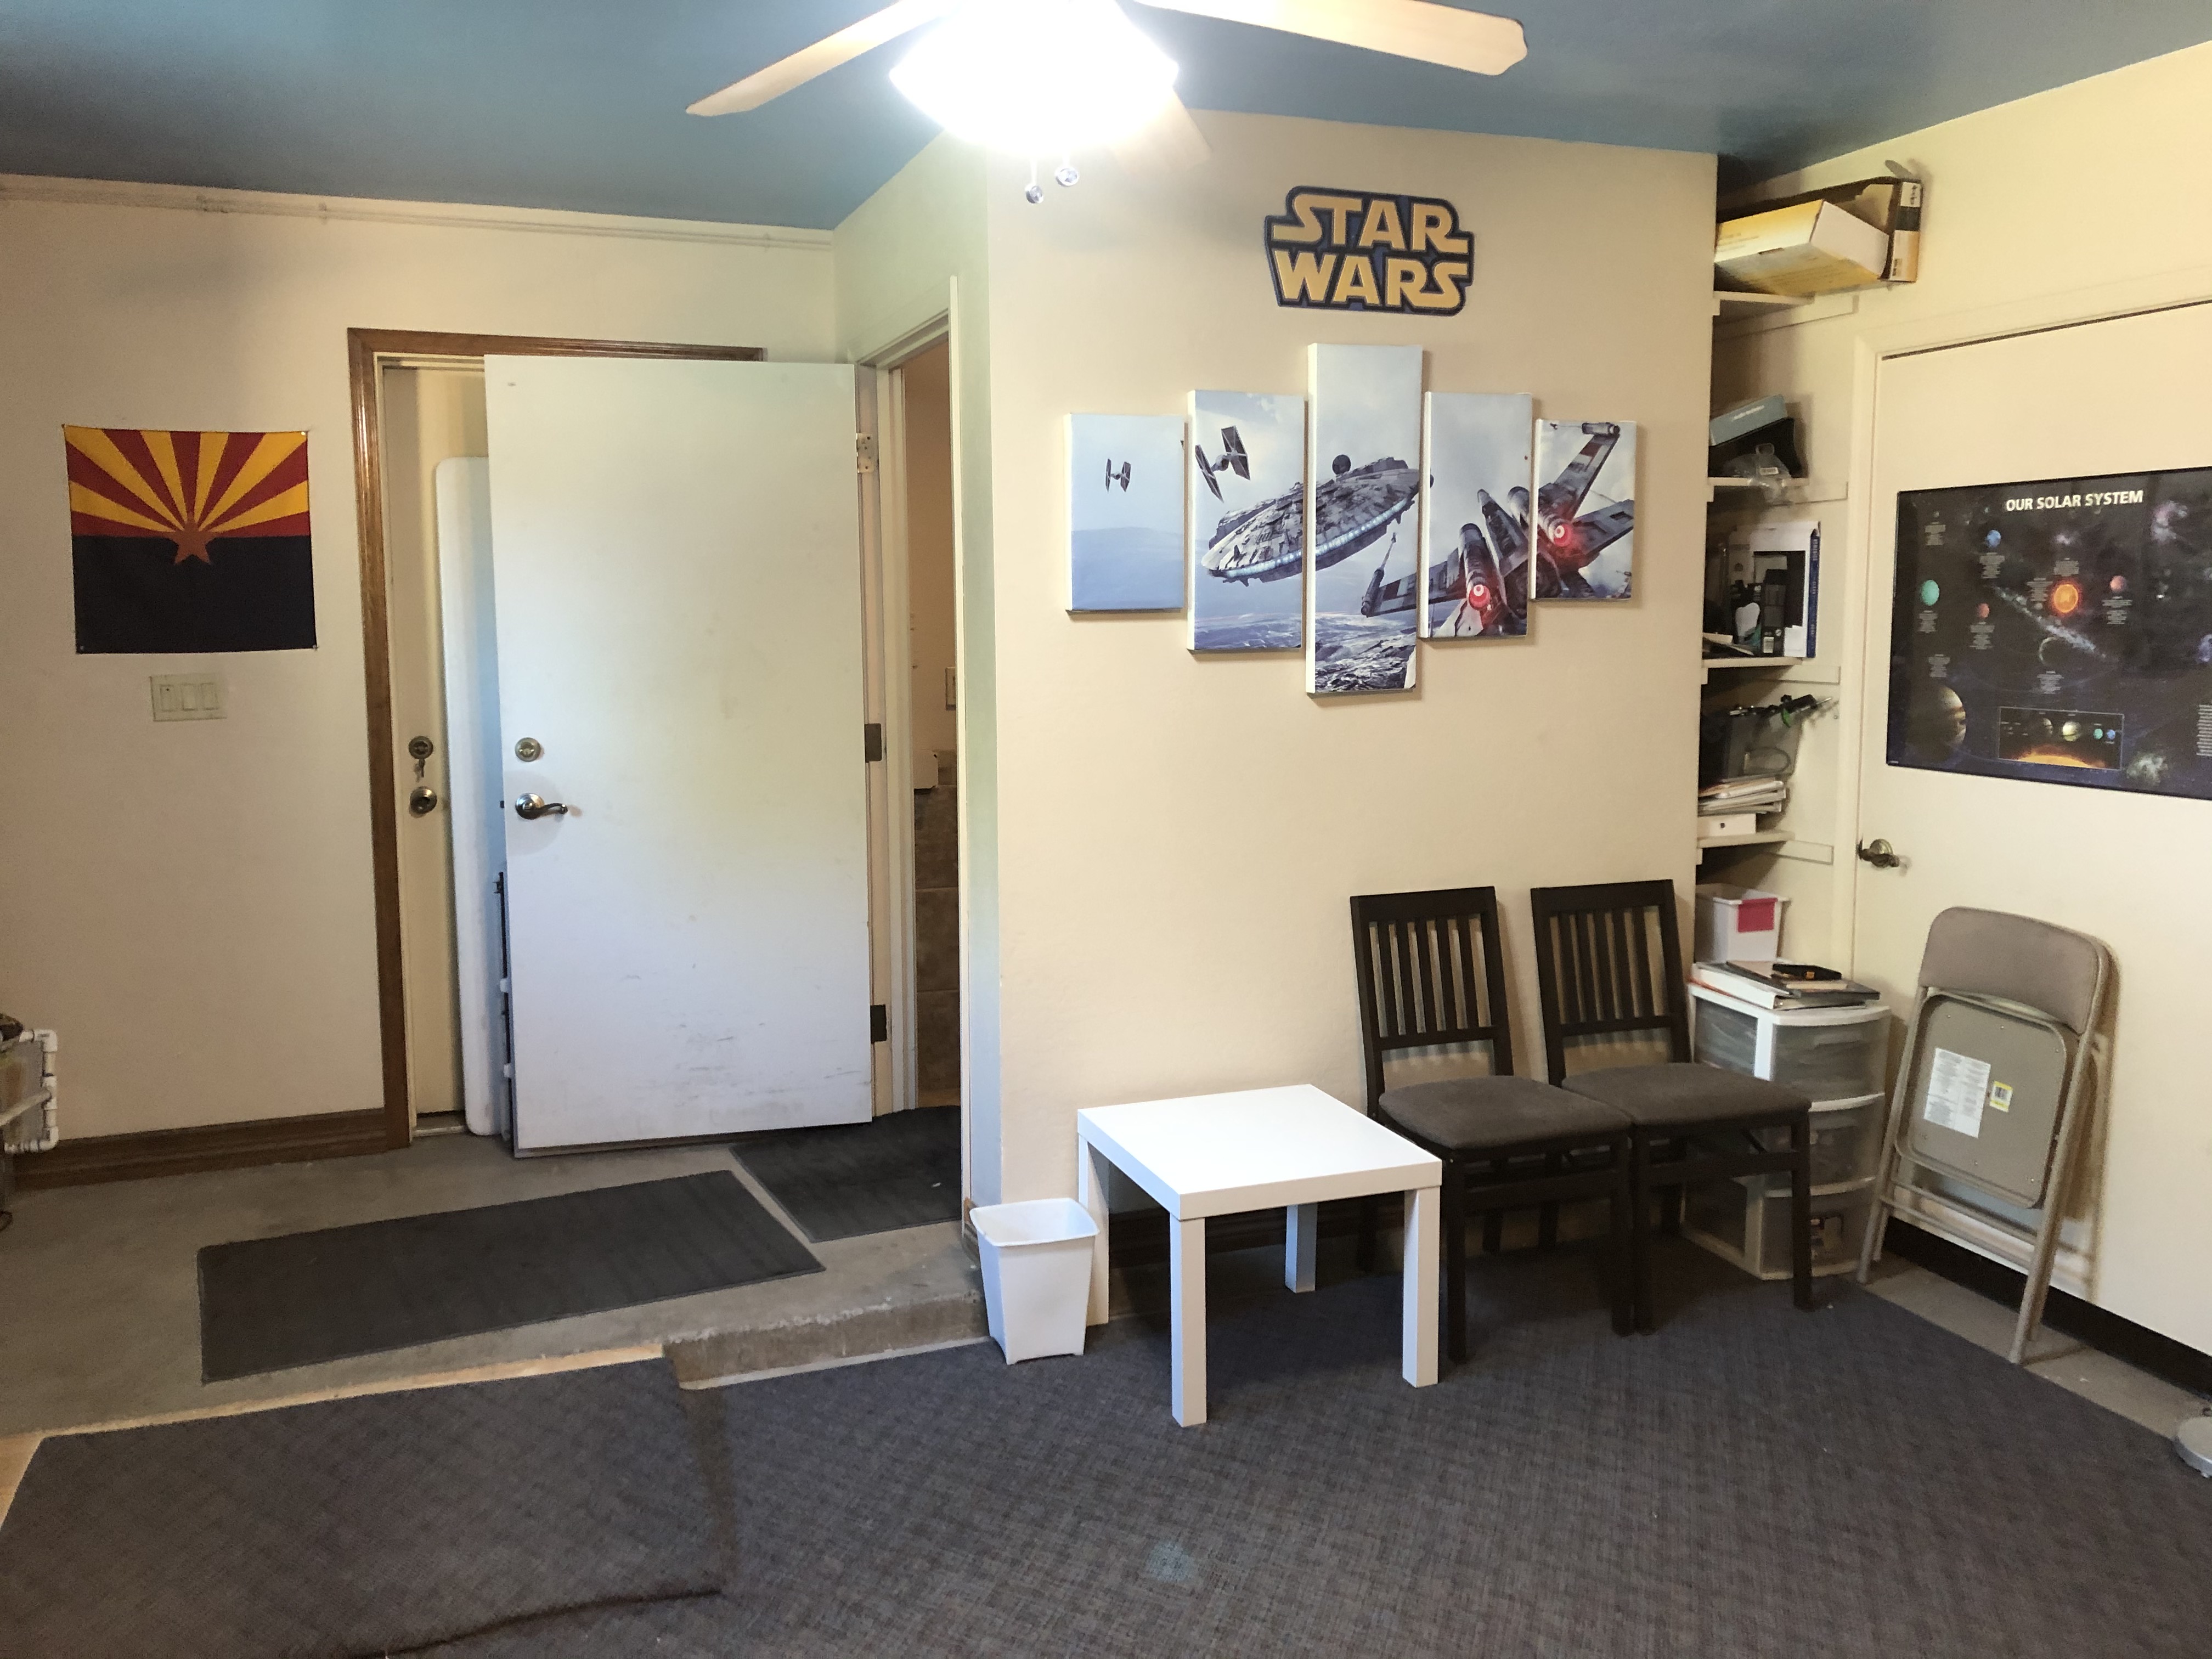 Image of the mancave entrance